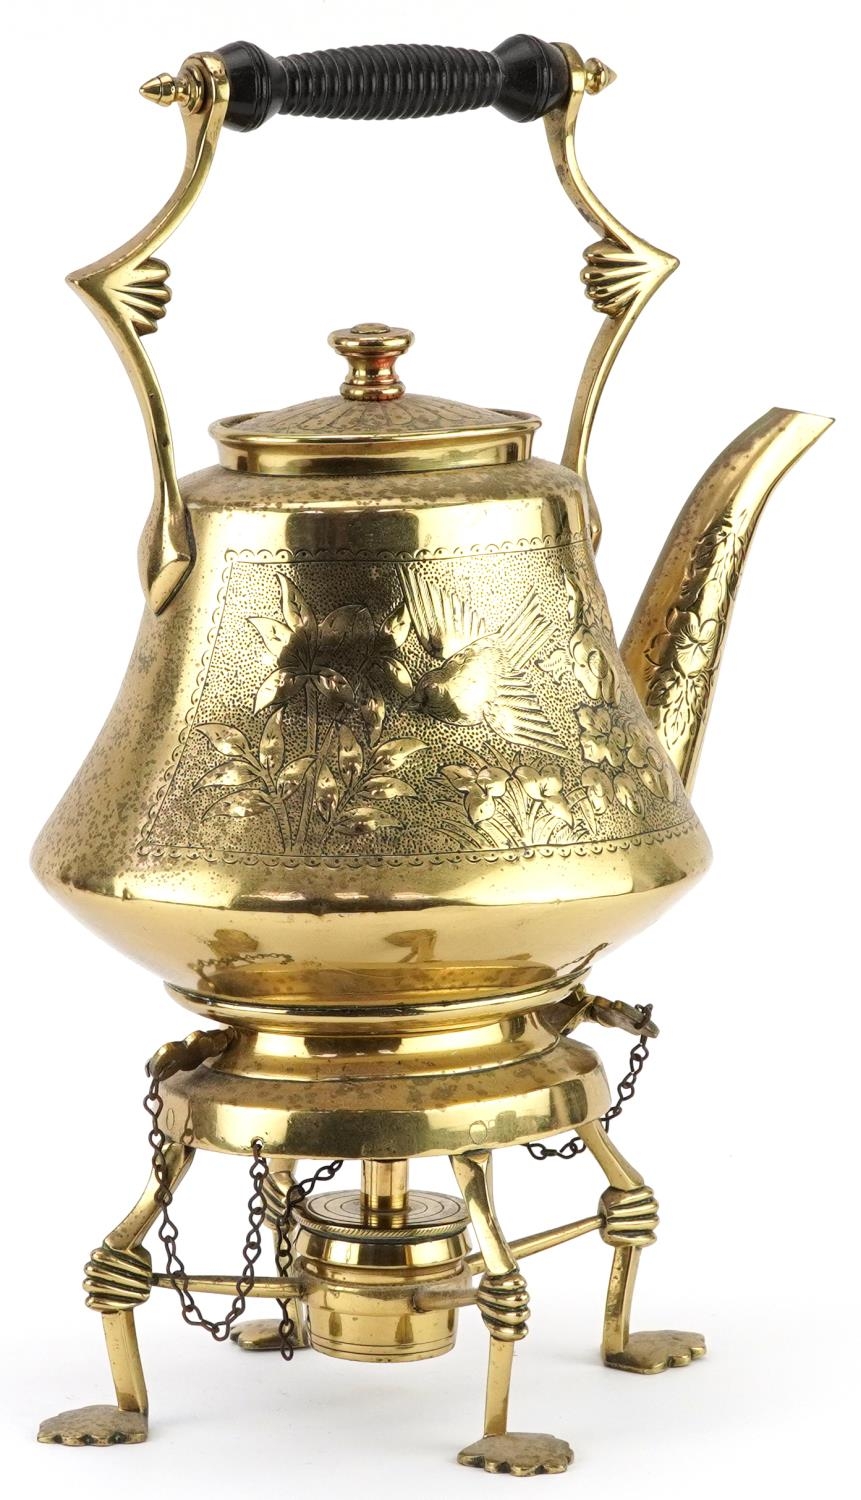 European Secessionist brass teapot on stand with burner, engraved and embossed with birds amongst - Image 2 of 3